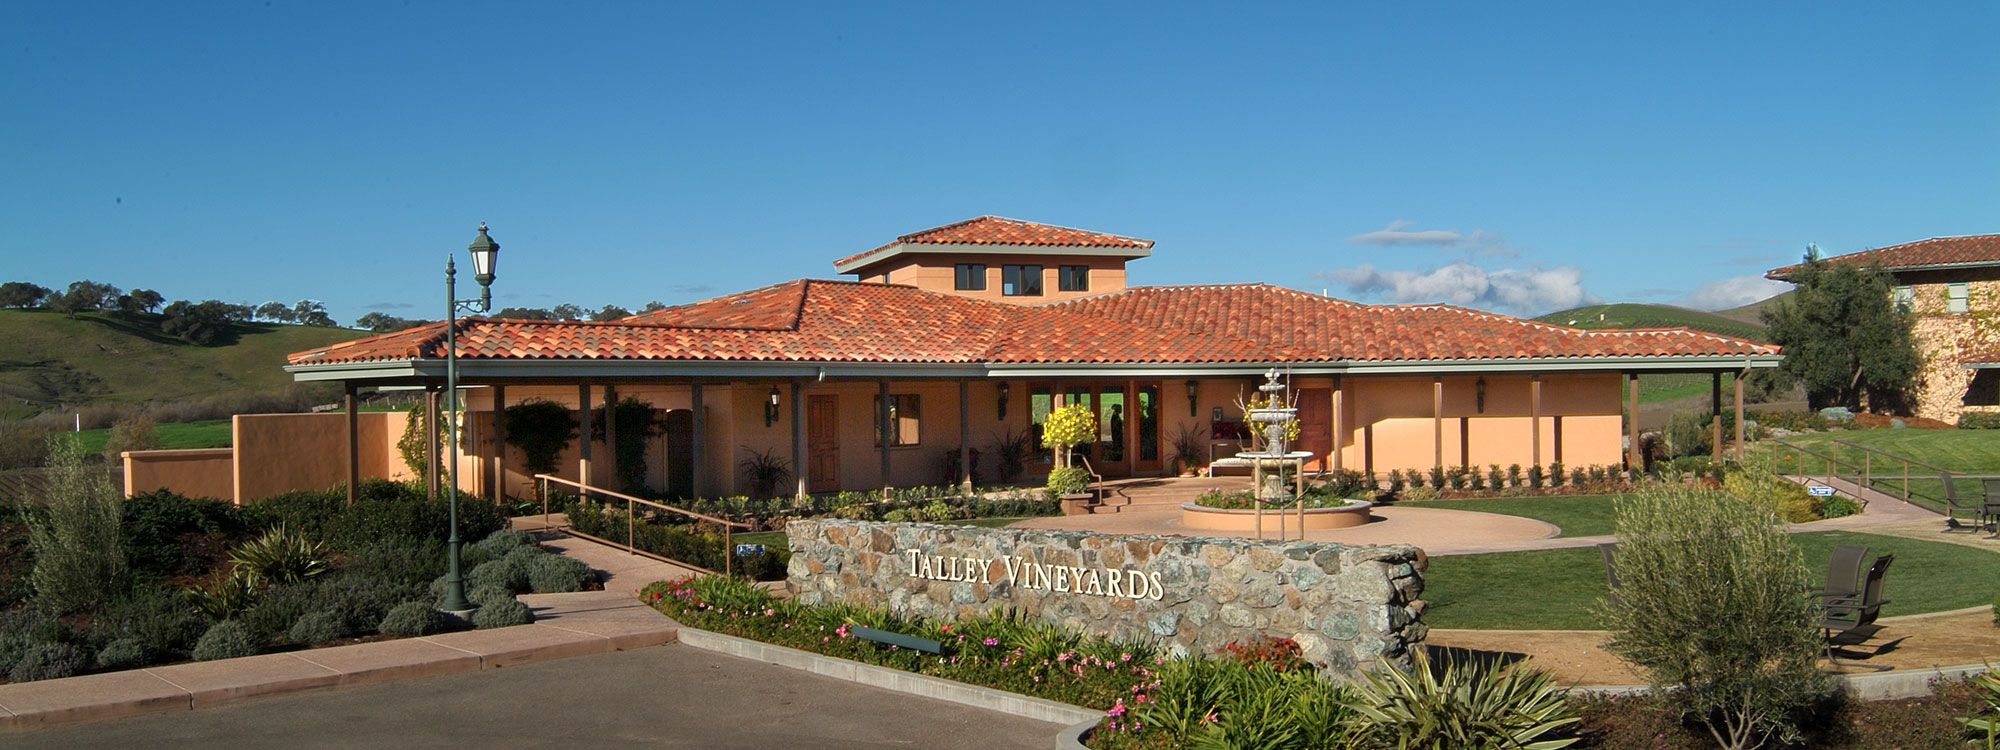 Winery Contractor and Builder - JW Design & Construction